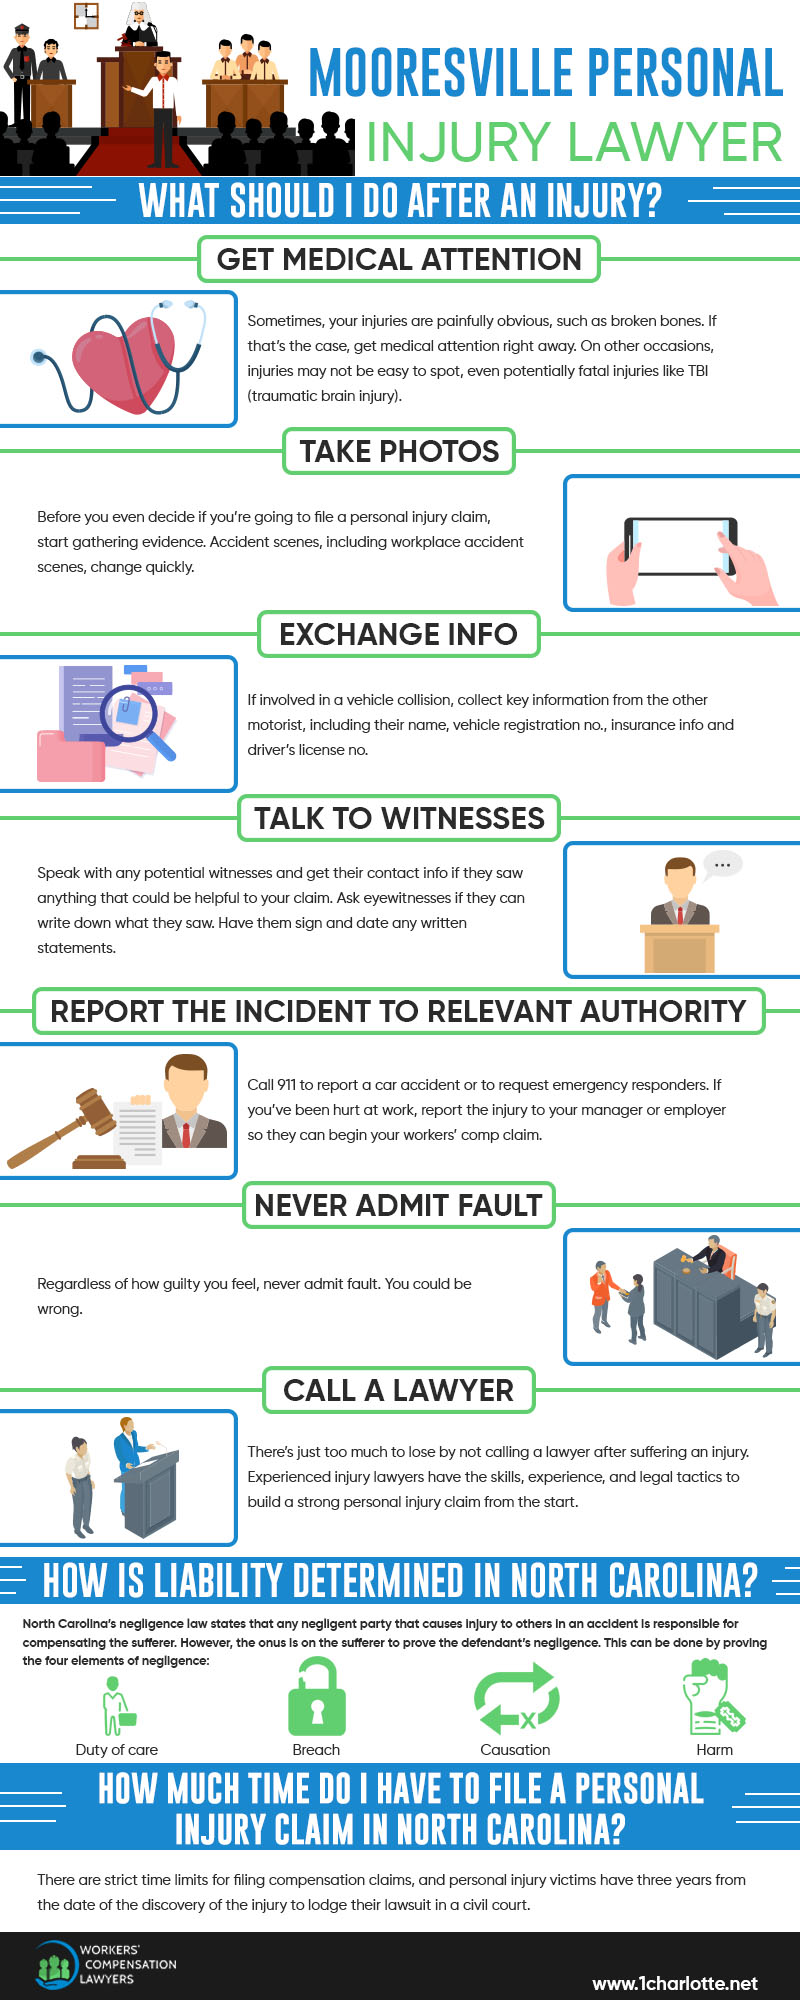 Mooresville Personal Injury Infographic